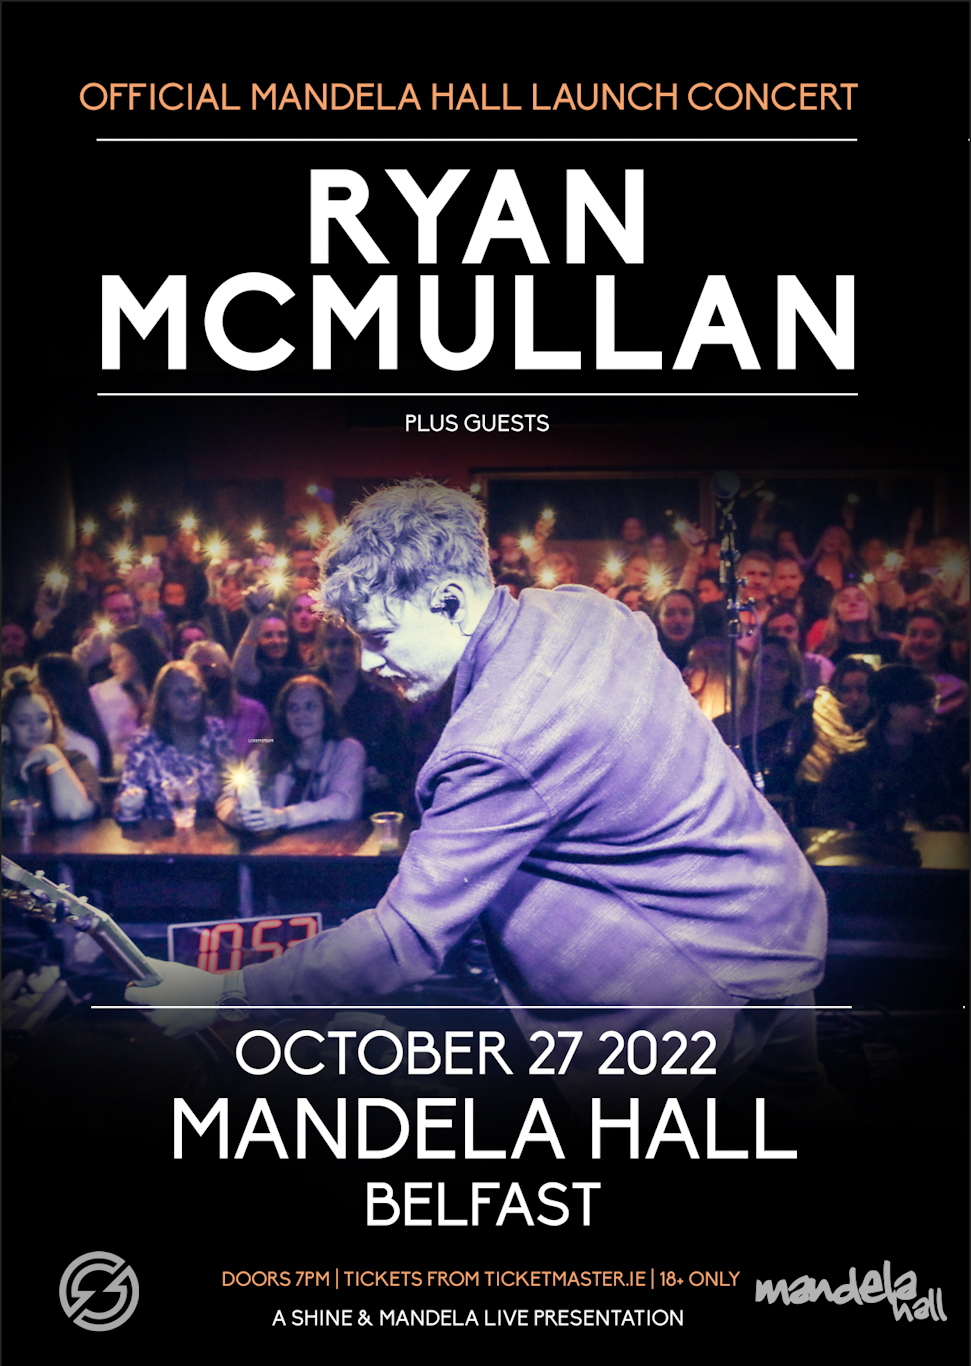 OFFICIAL MANDELA HALL LAUNCH CONCERT: RYAN MCMULLAN + GUESTS | ON SALE WEDNESDAY AT 10AM